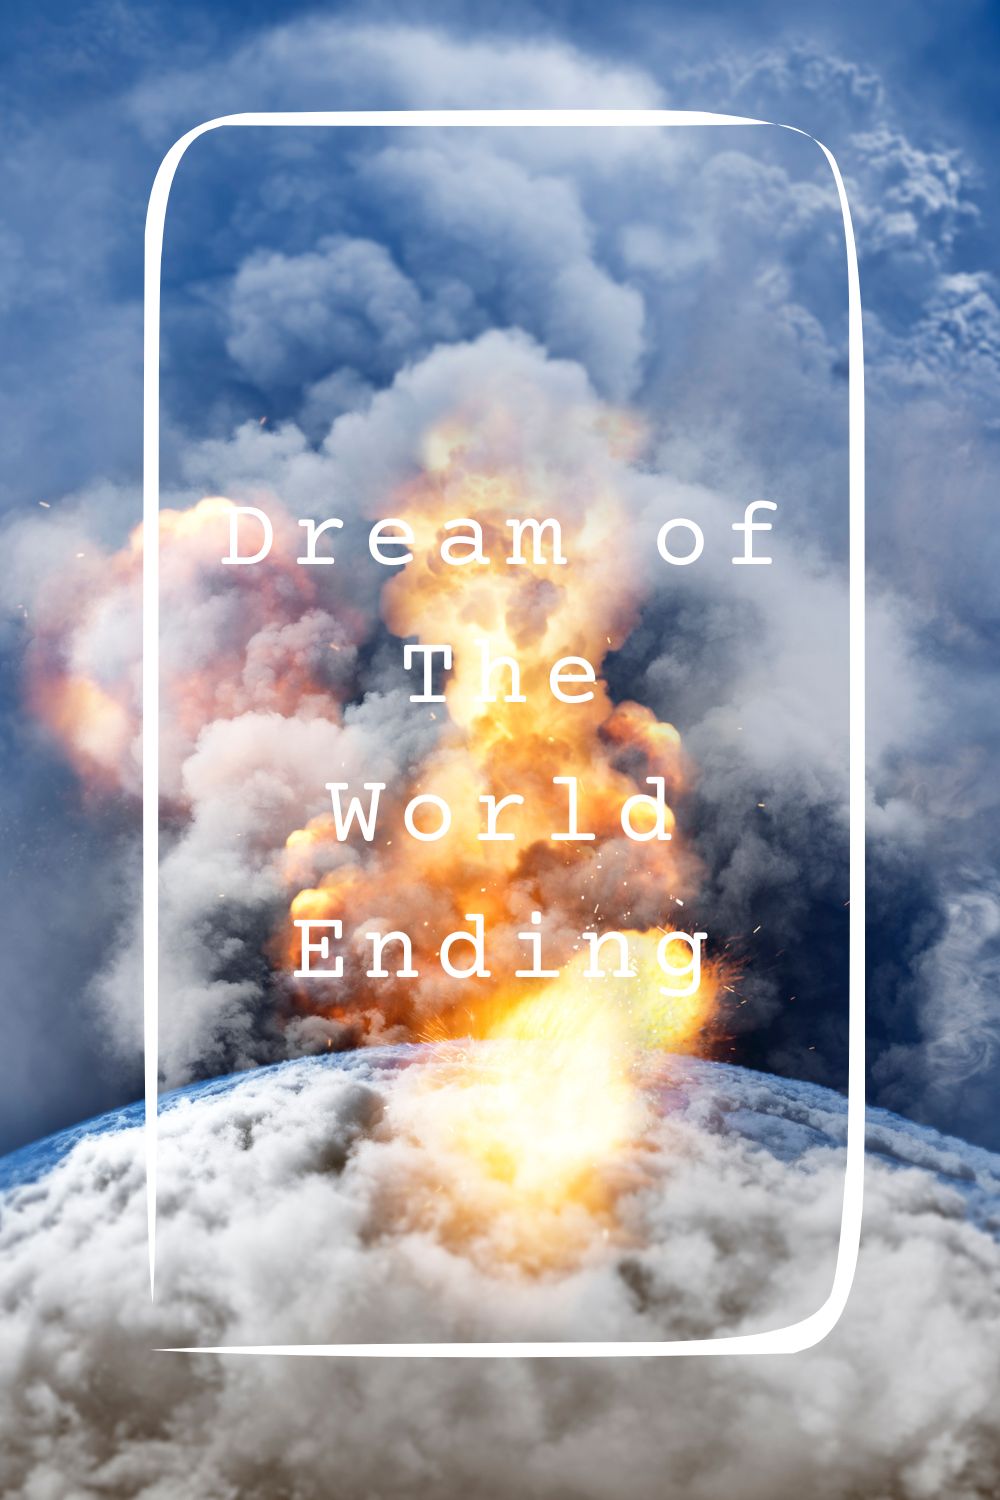 8 Dream of The World Ending Meanings4